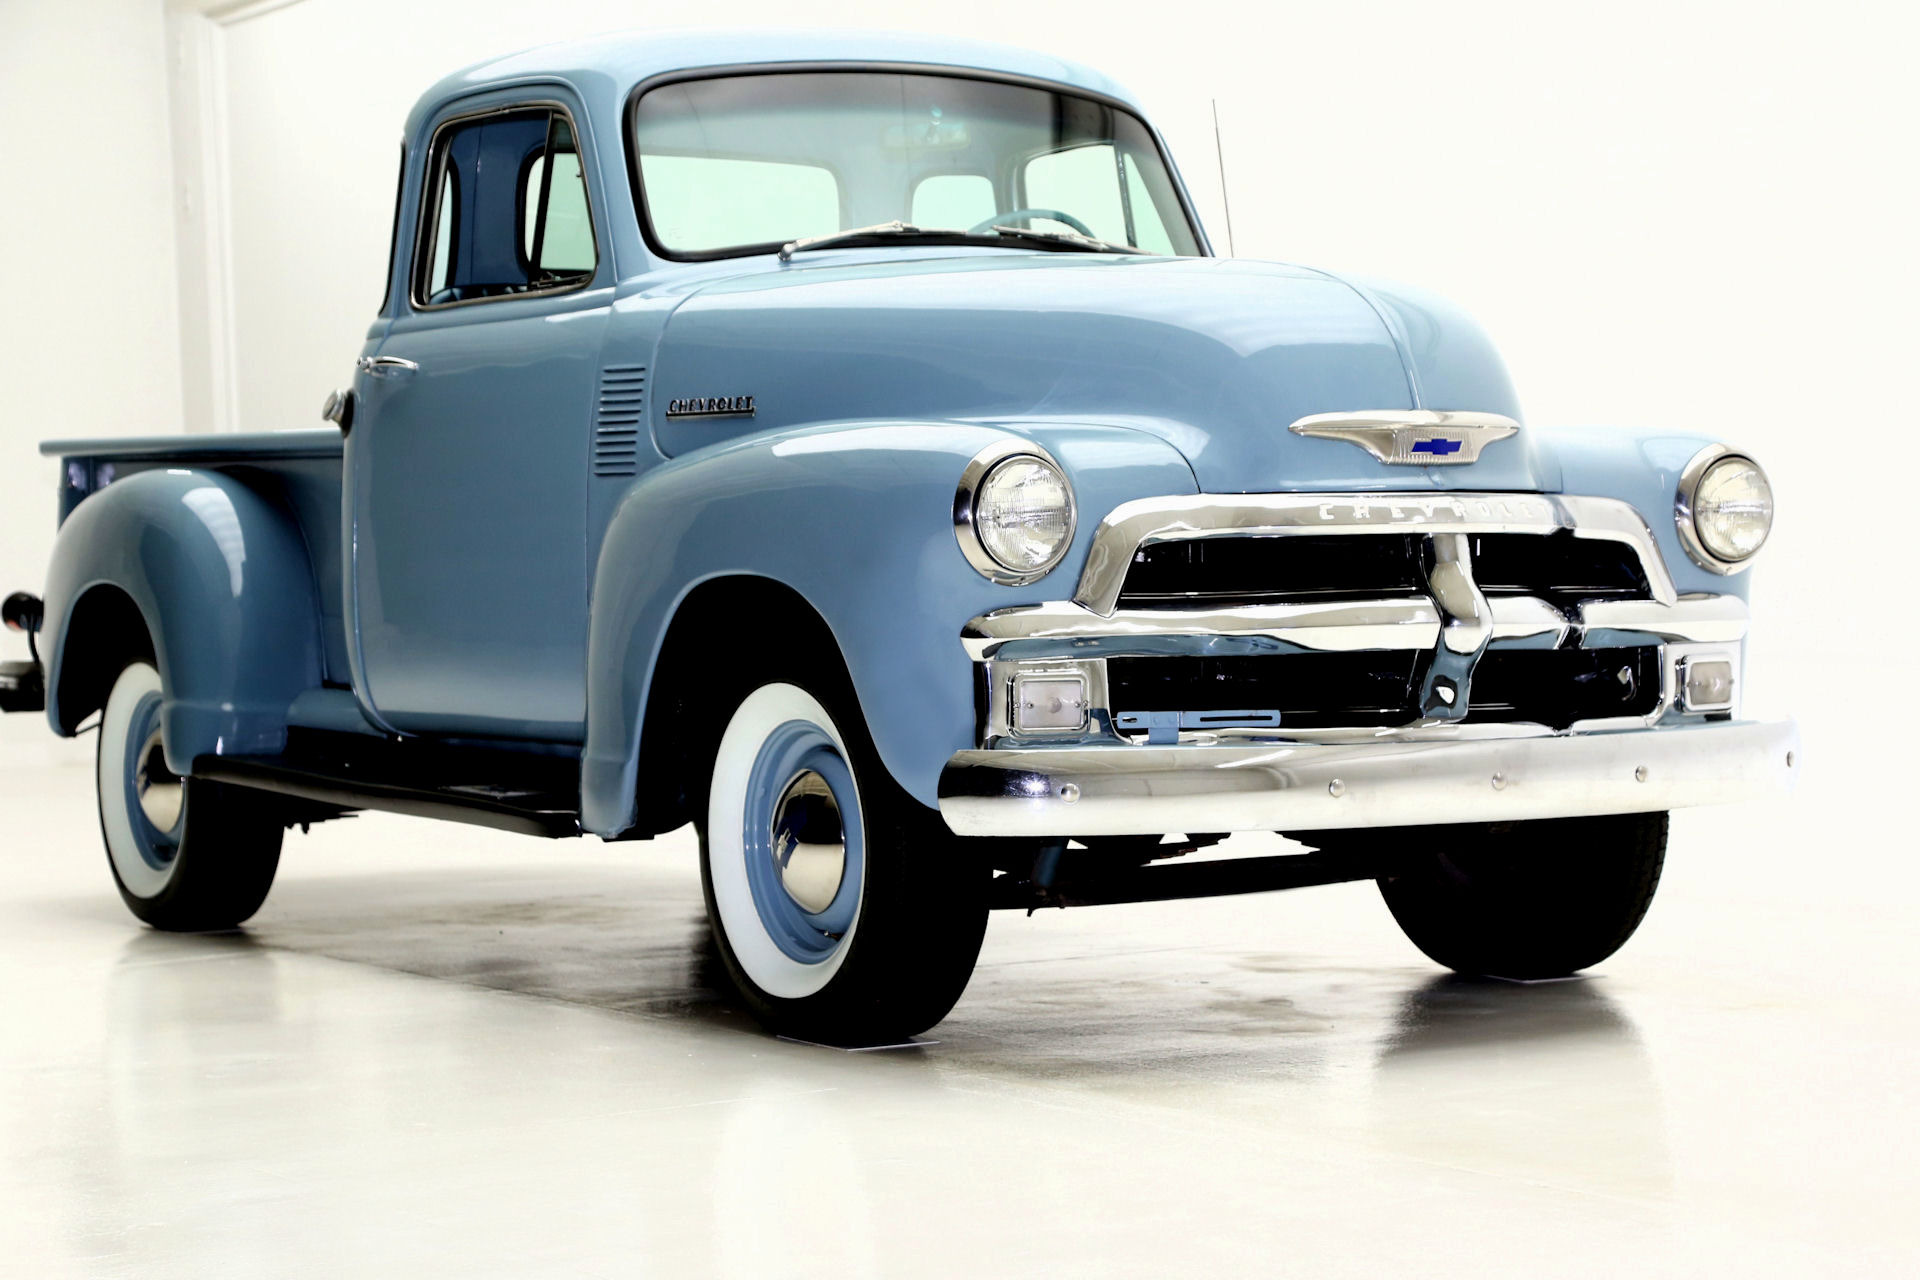 1955 chevrolet 3100 pickup blue 5 window c 225 sold=Available&